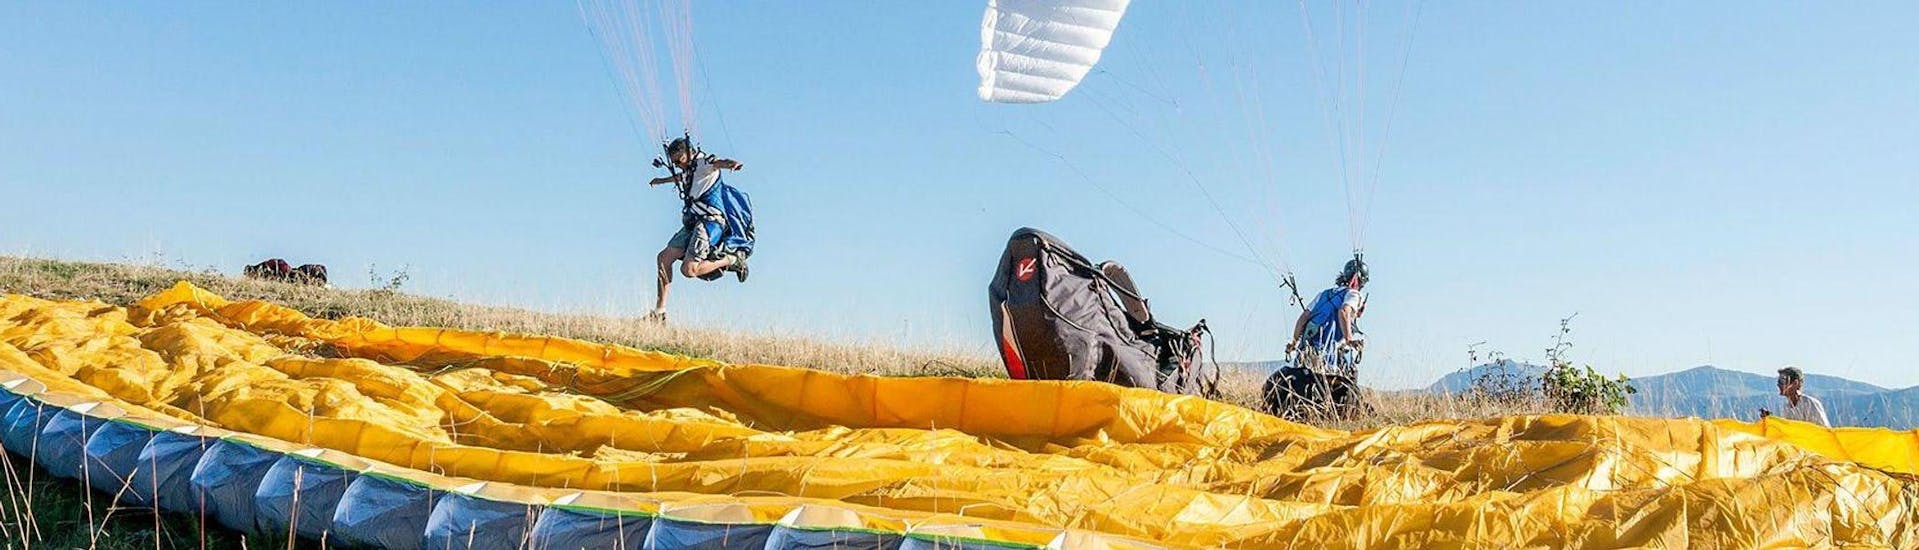 A person is coming back from his Tandem Paragliding in Verdon -Sensation Ascendance activity with Haut Les Mains.